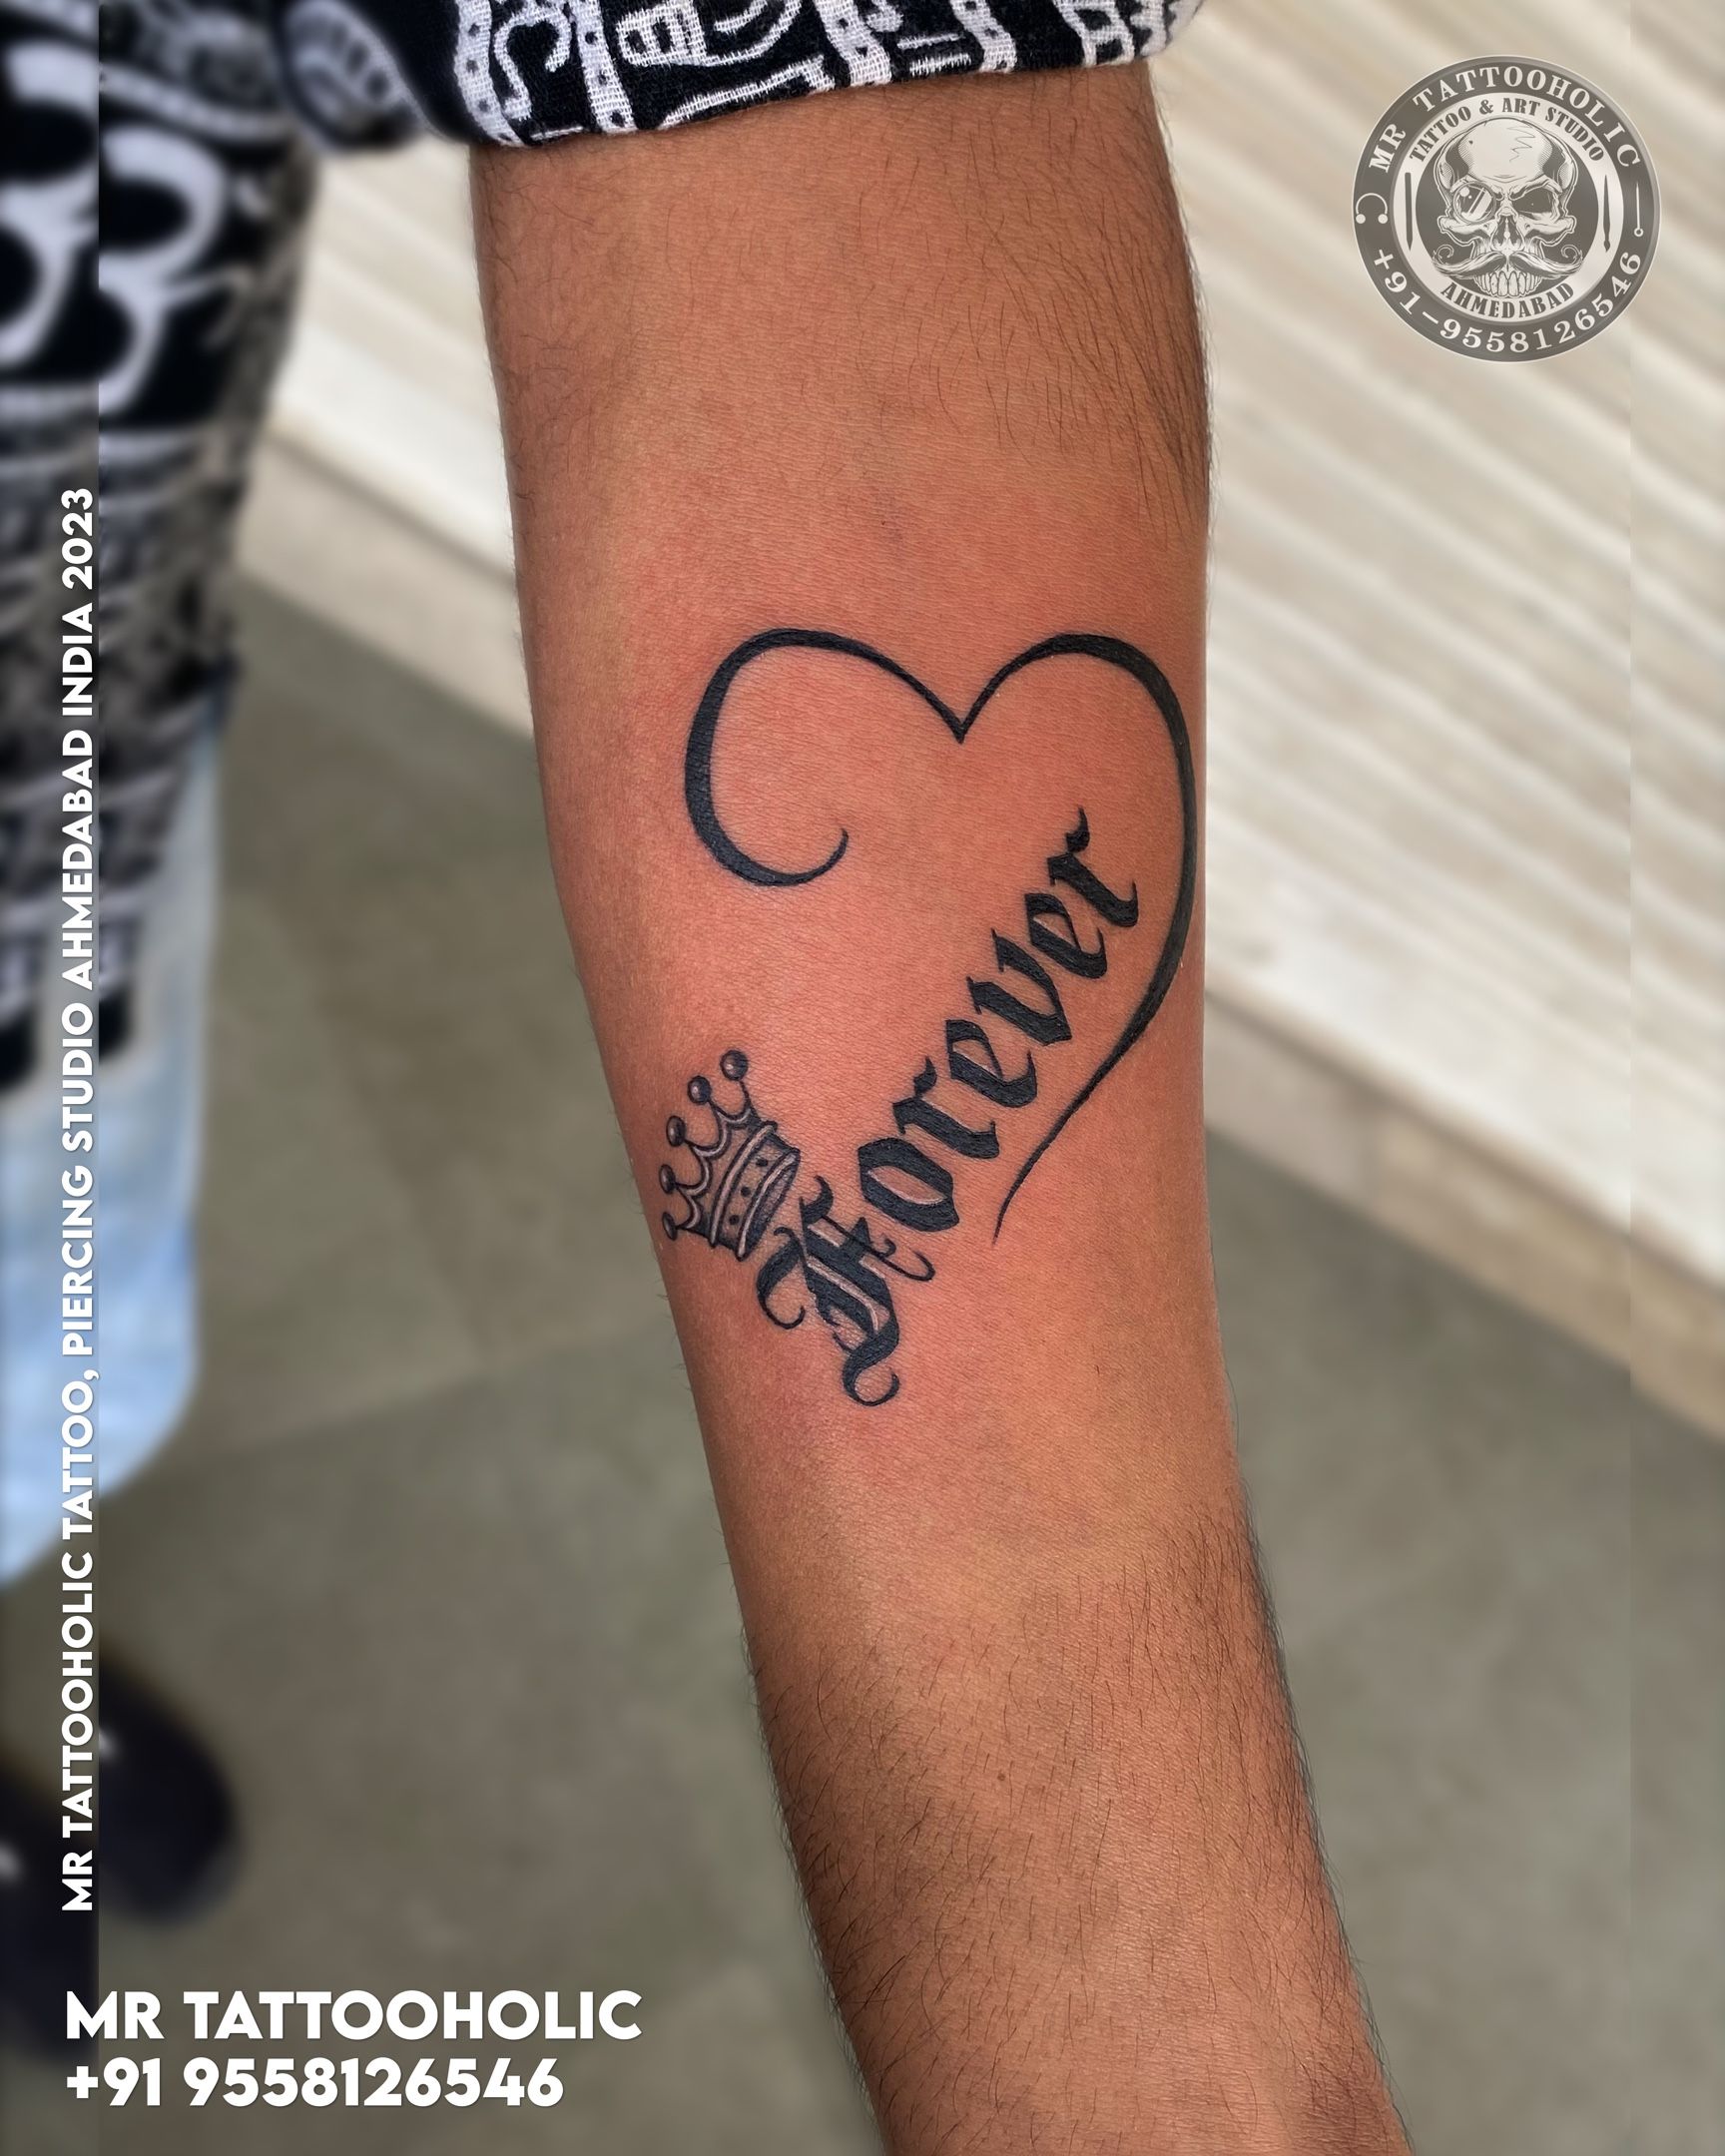 shraddha  famous tattoo words download free scetch